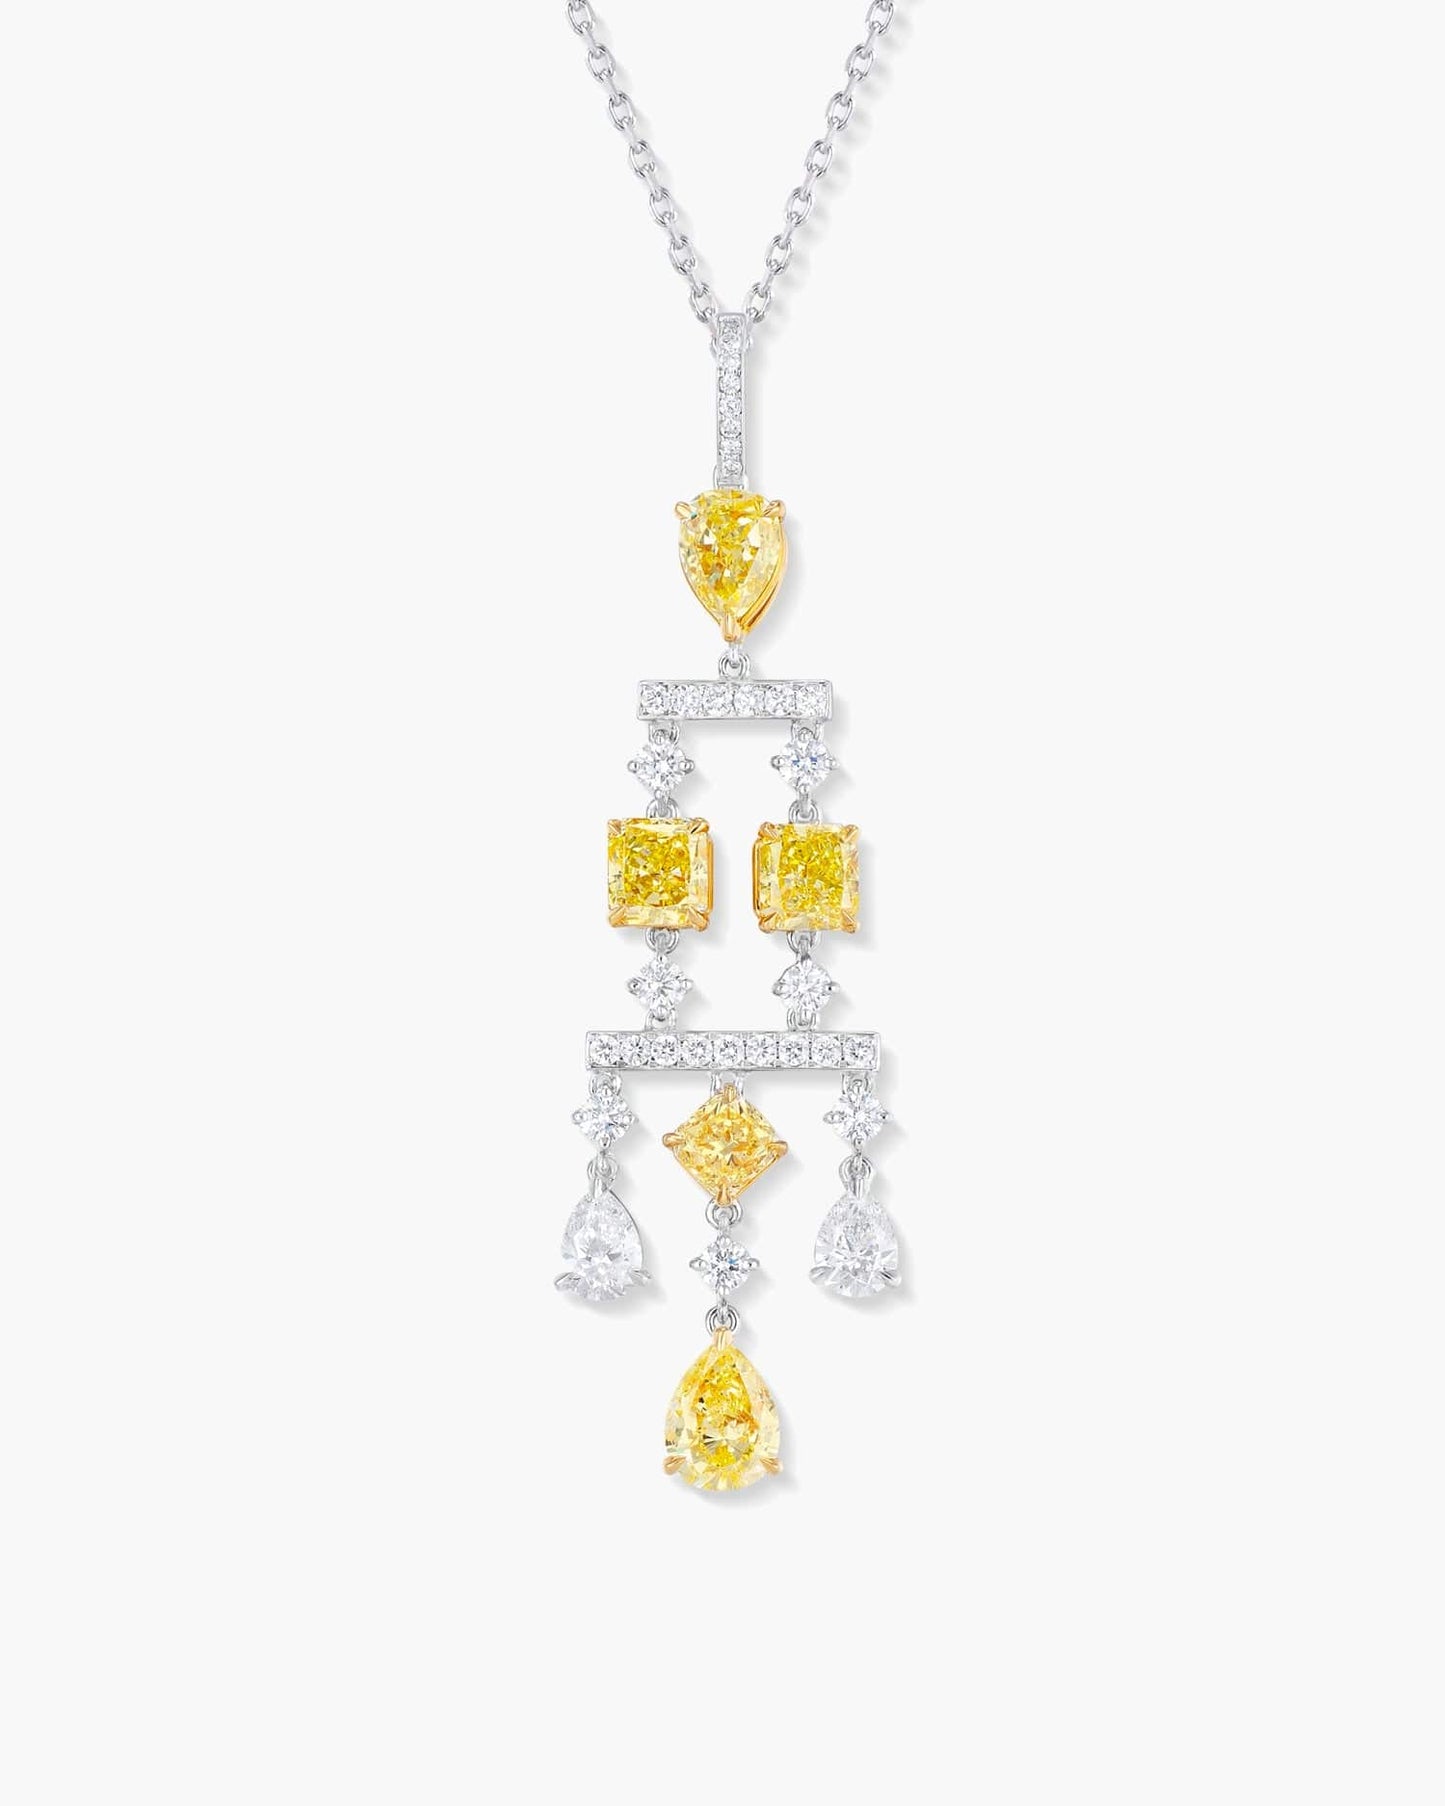 Fancy Shaped Yellow and White Diamond Pendant Necklace, 3.71 carats